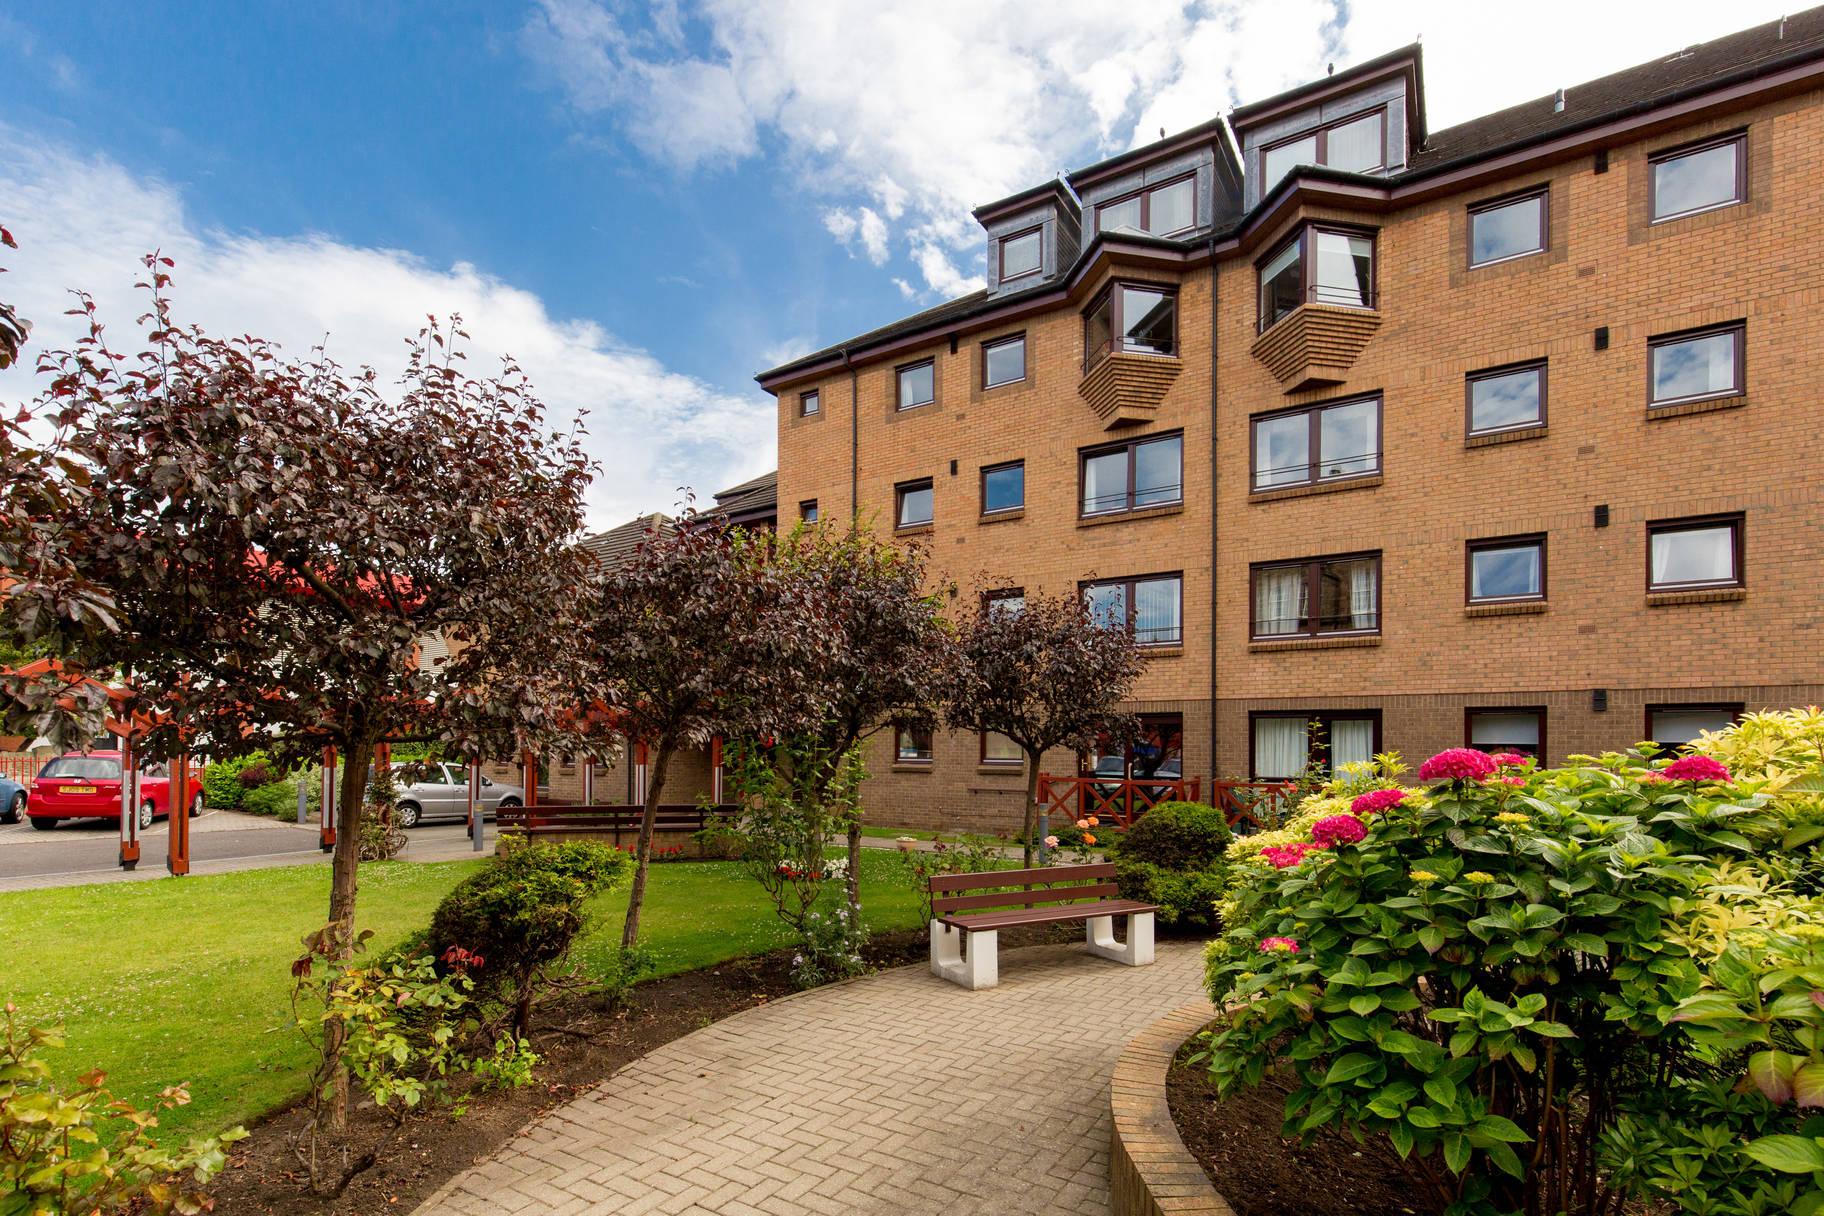 Flat 217, 173 Carlyle Court, Comely Bank Road, Edinburgh, EH4 1DH